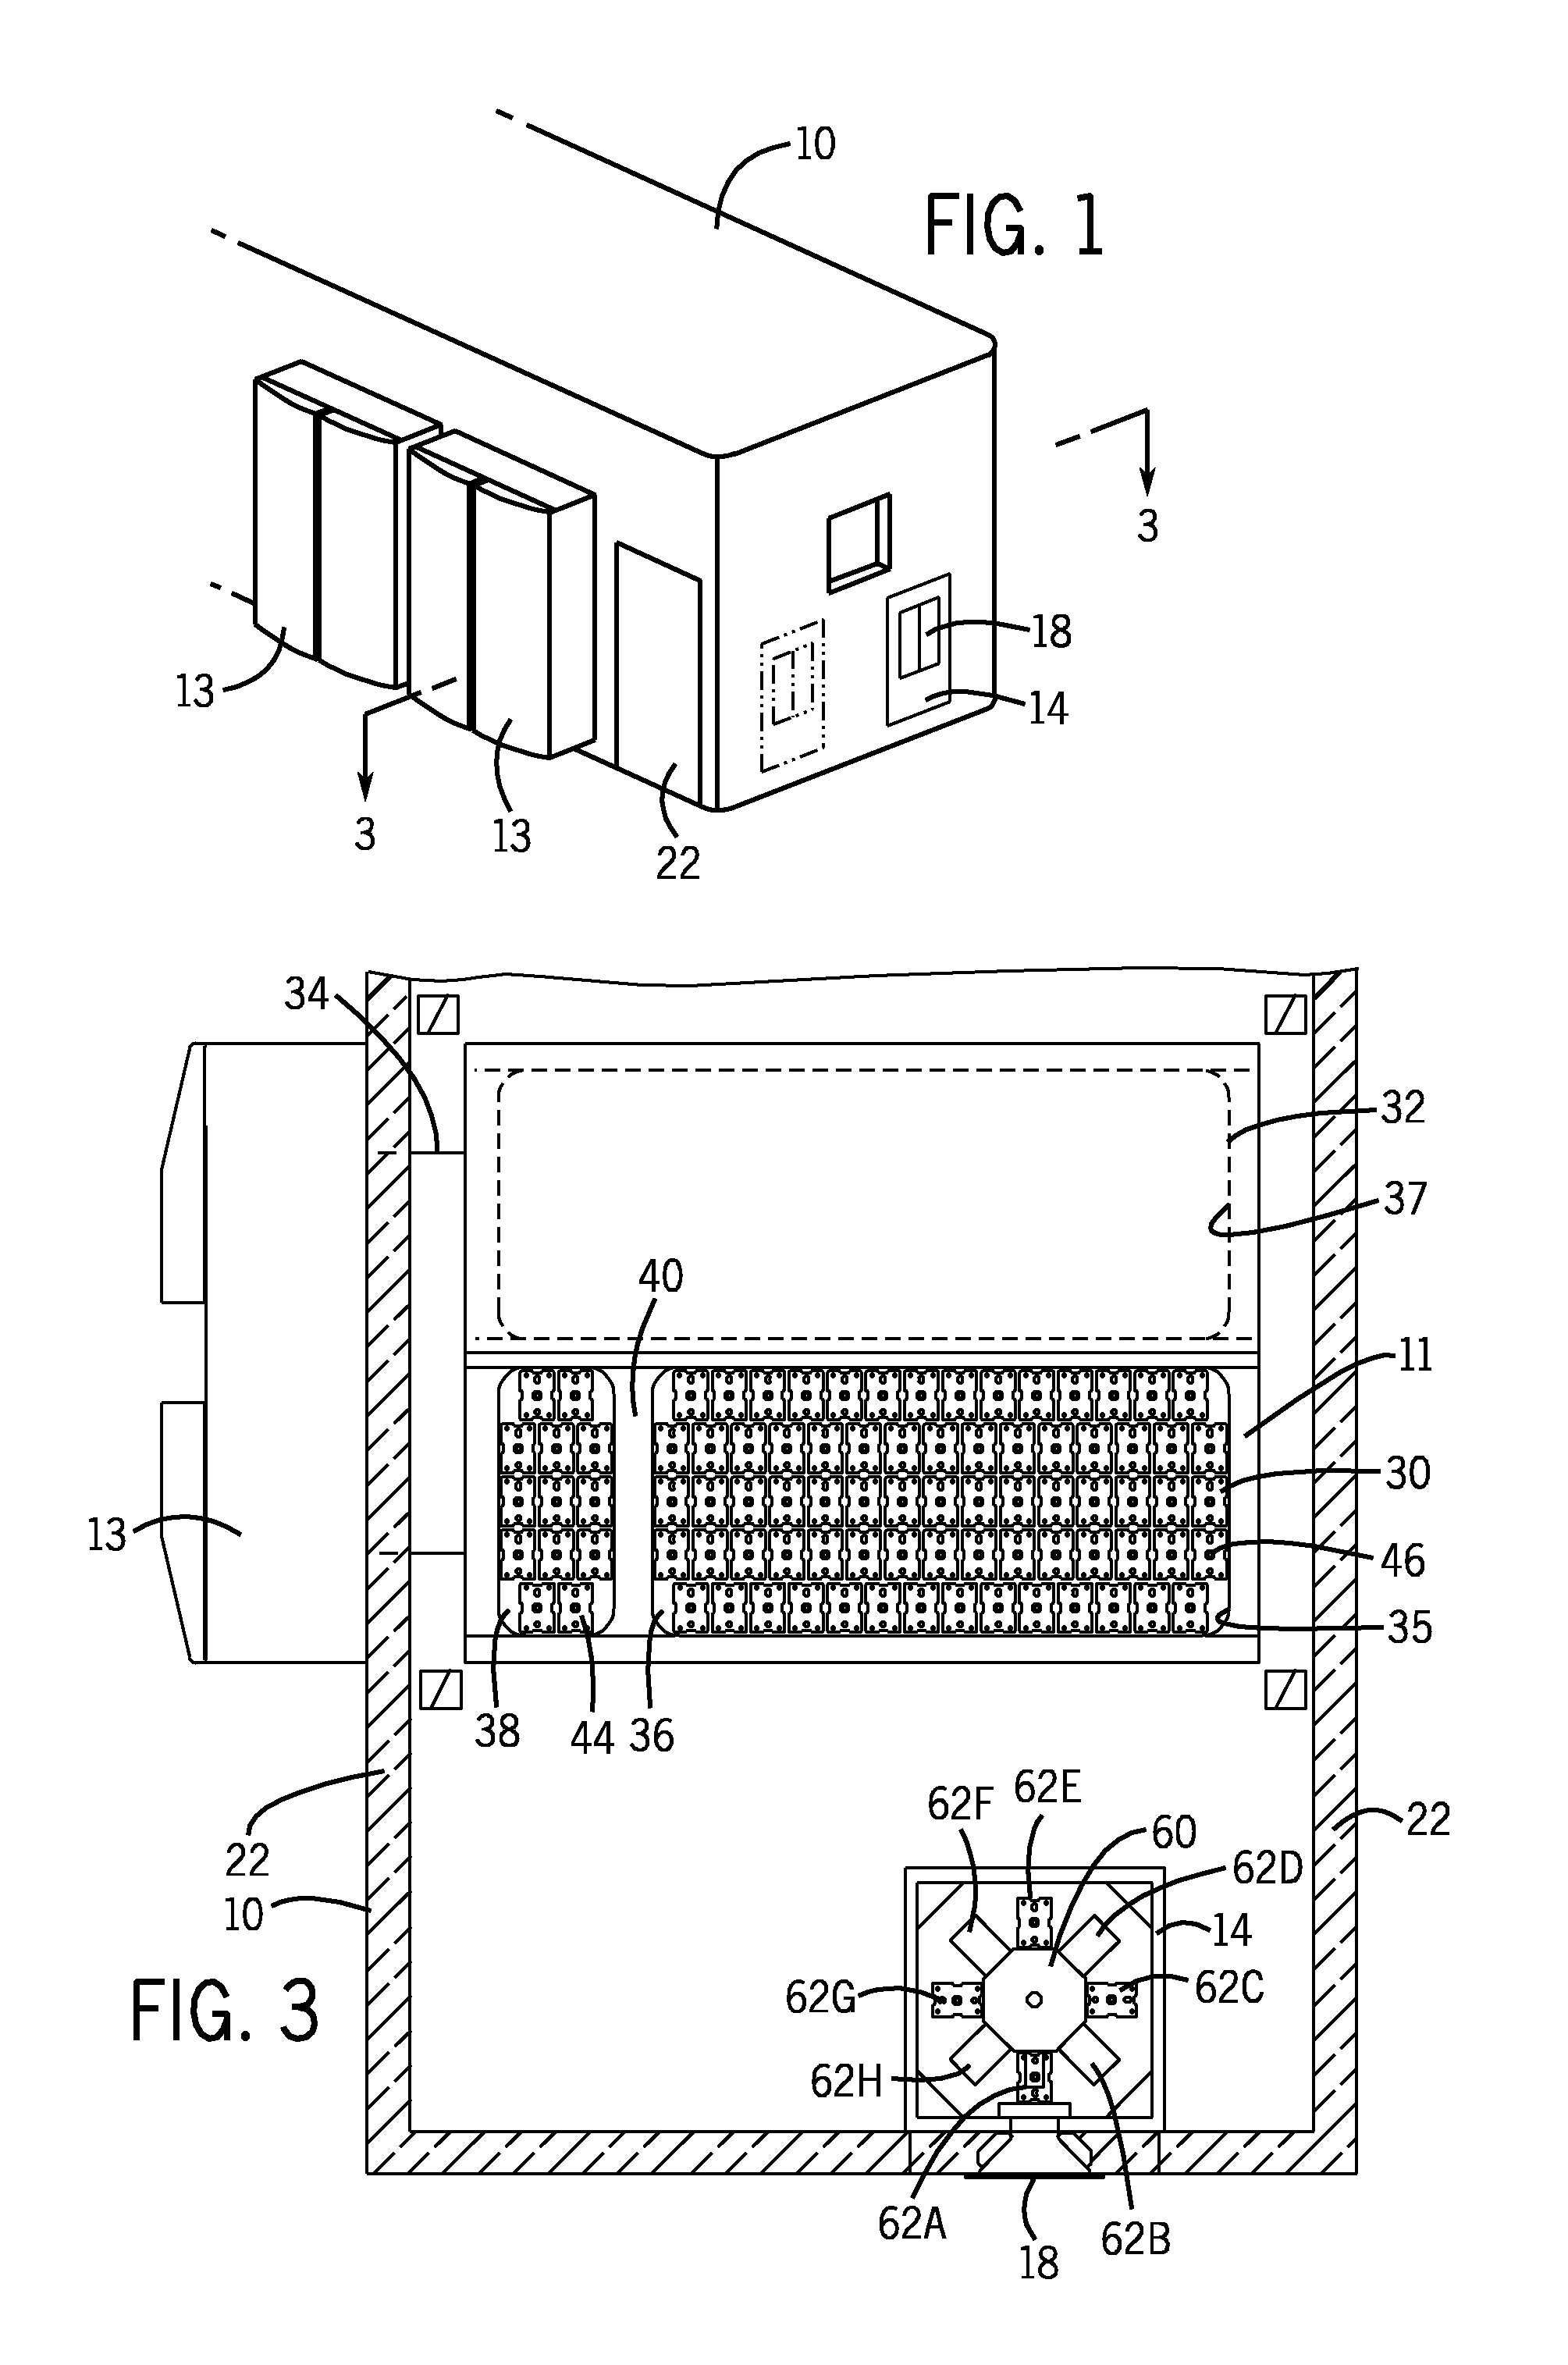 Input/Output Module and Overall Temperature Control of Samples